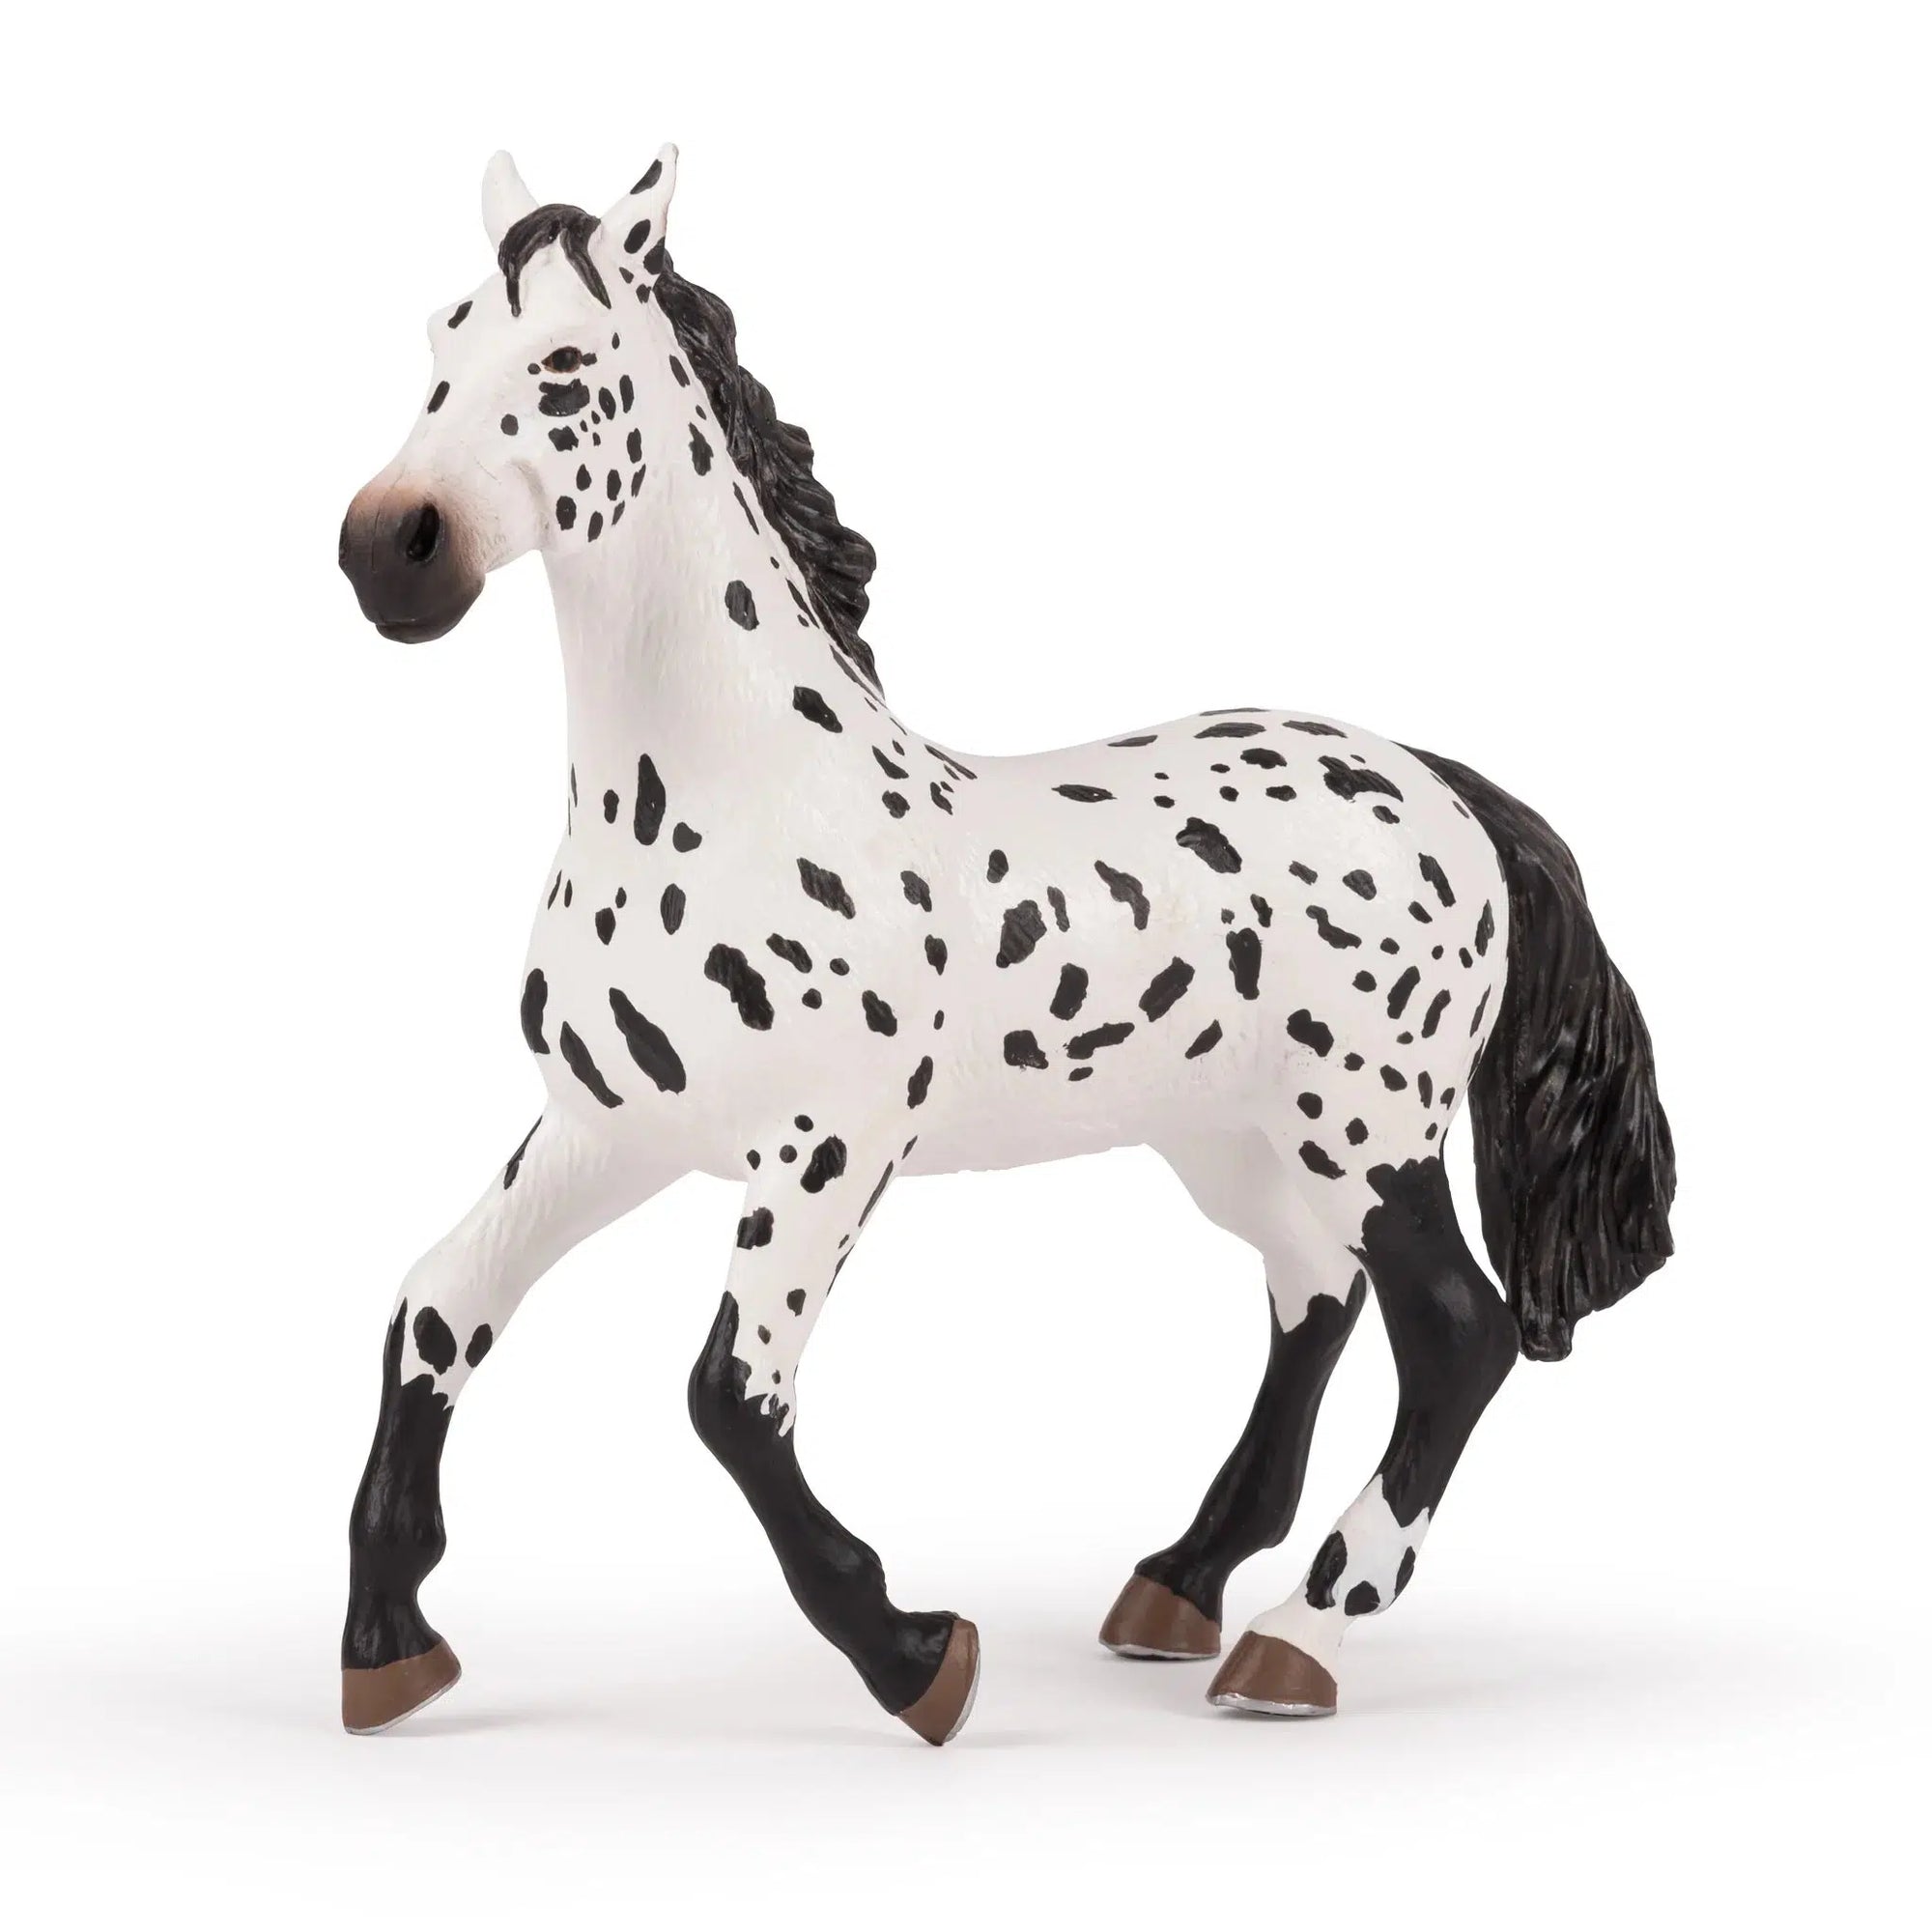 Front view of the large Appaloosa Horse against a white background.